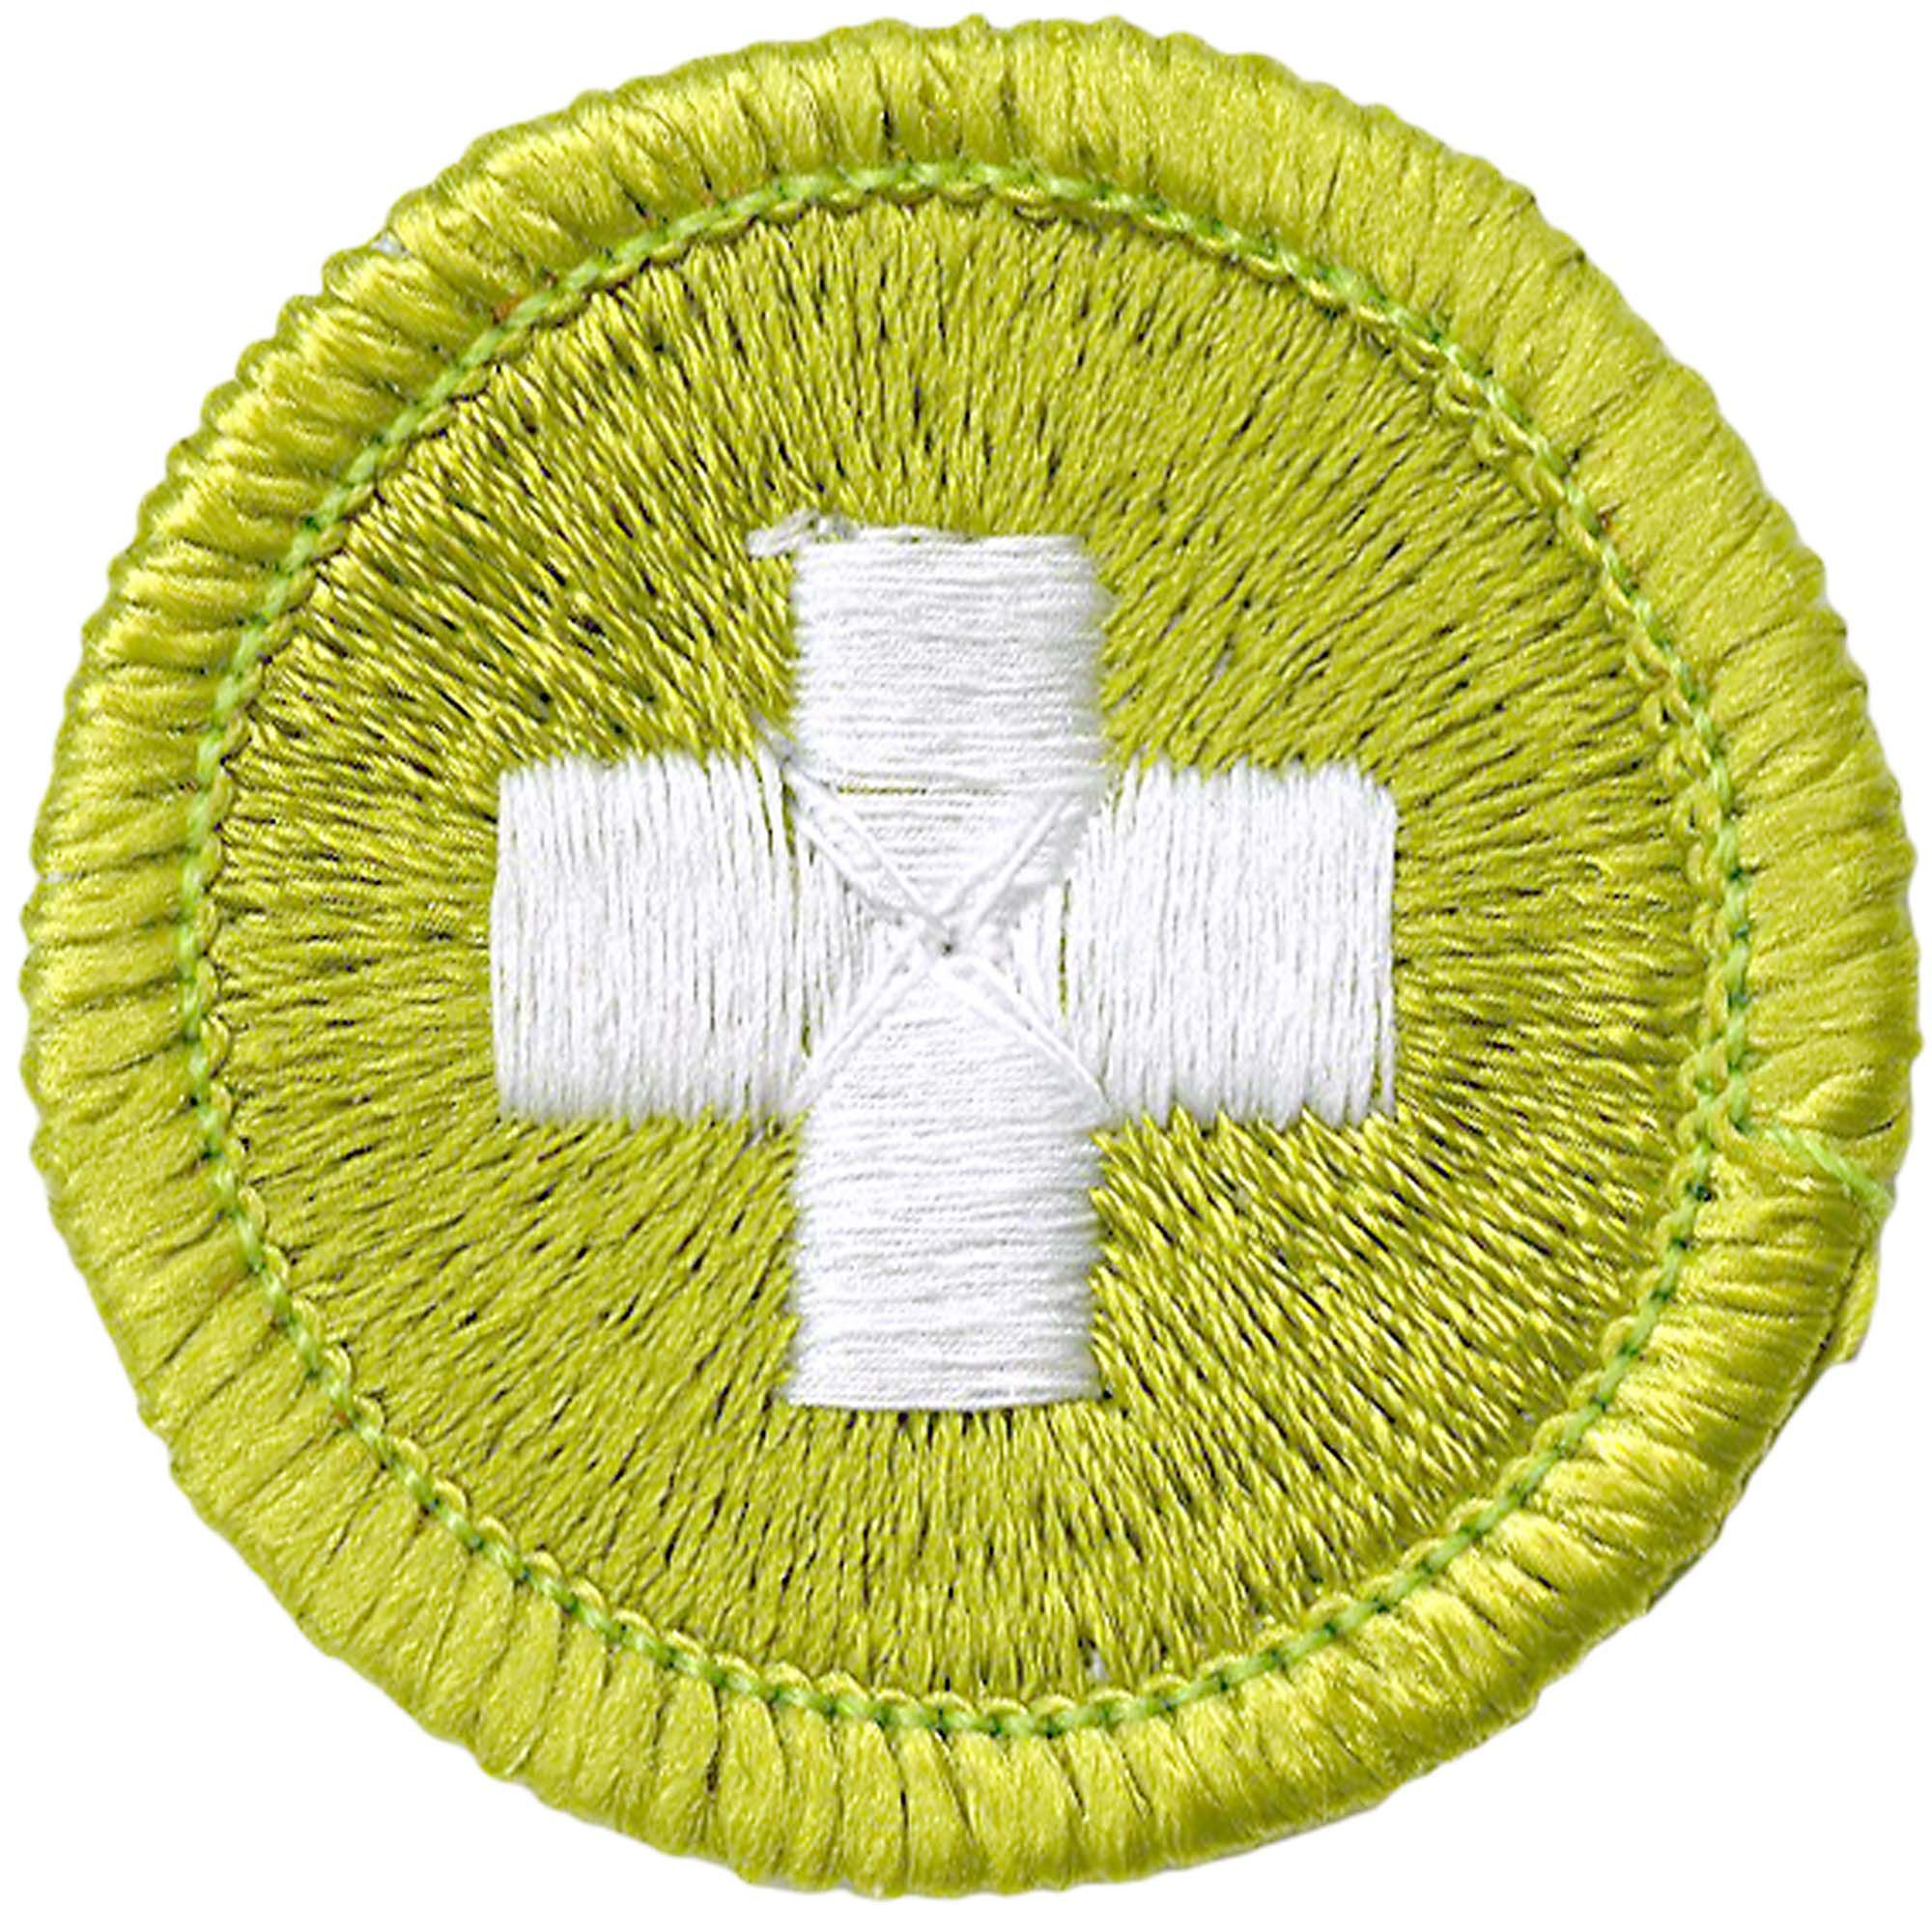 GREEN BORDER CLOTH BACK 9439 Details about   SAFETY TYPE G MERIT BADGE BOY SCOUTS 